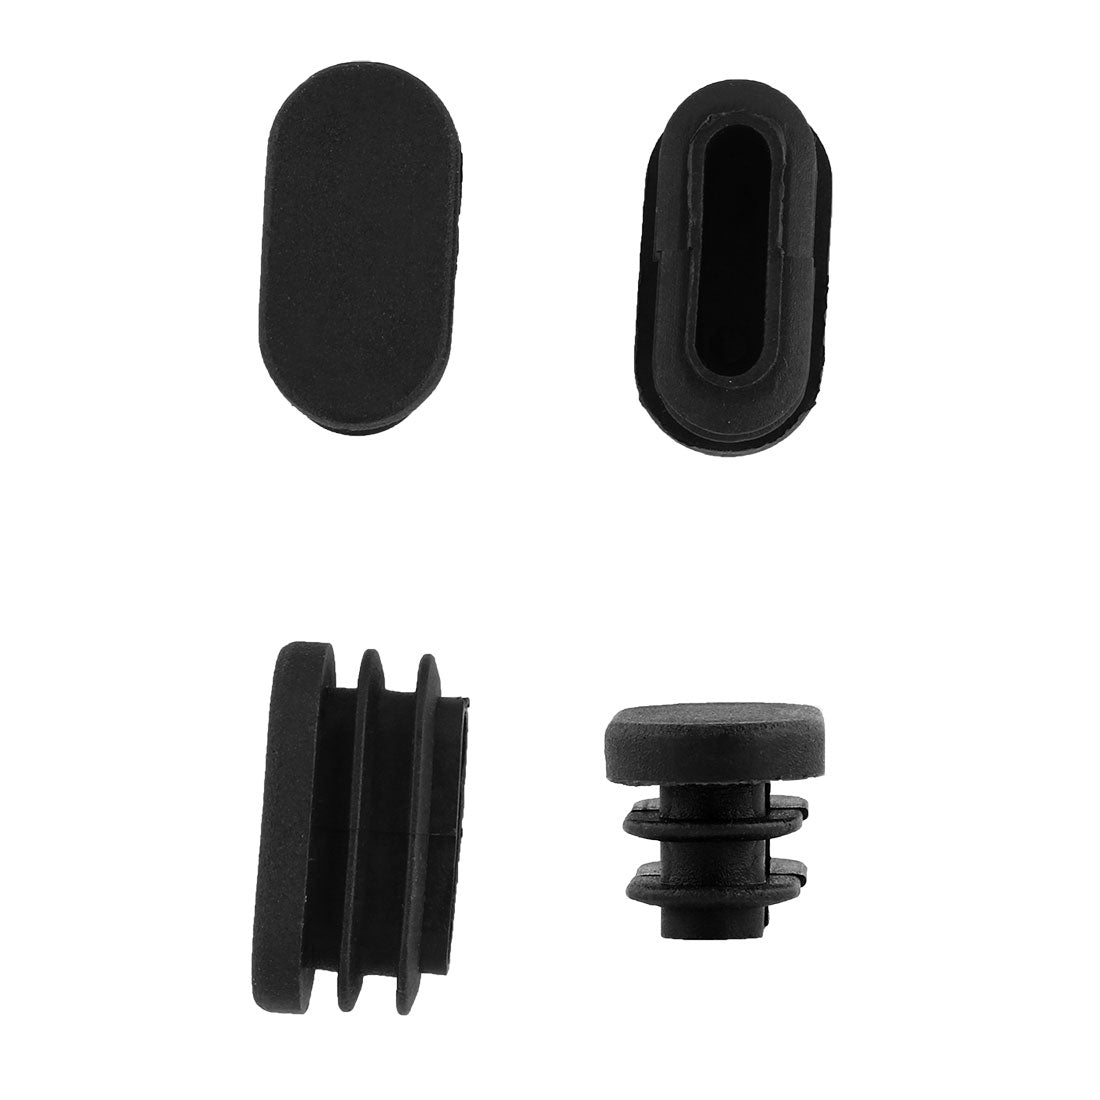 uxcell Uxcell 16mm x 30mm Plastic Oval Shaped End Cup Tube Insert Black 24 Pcs